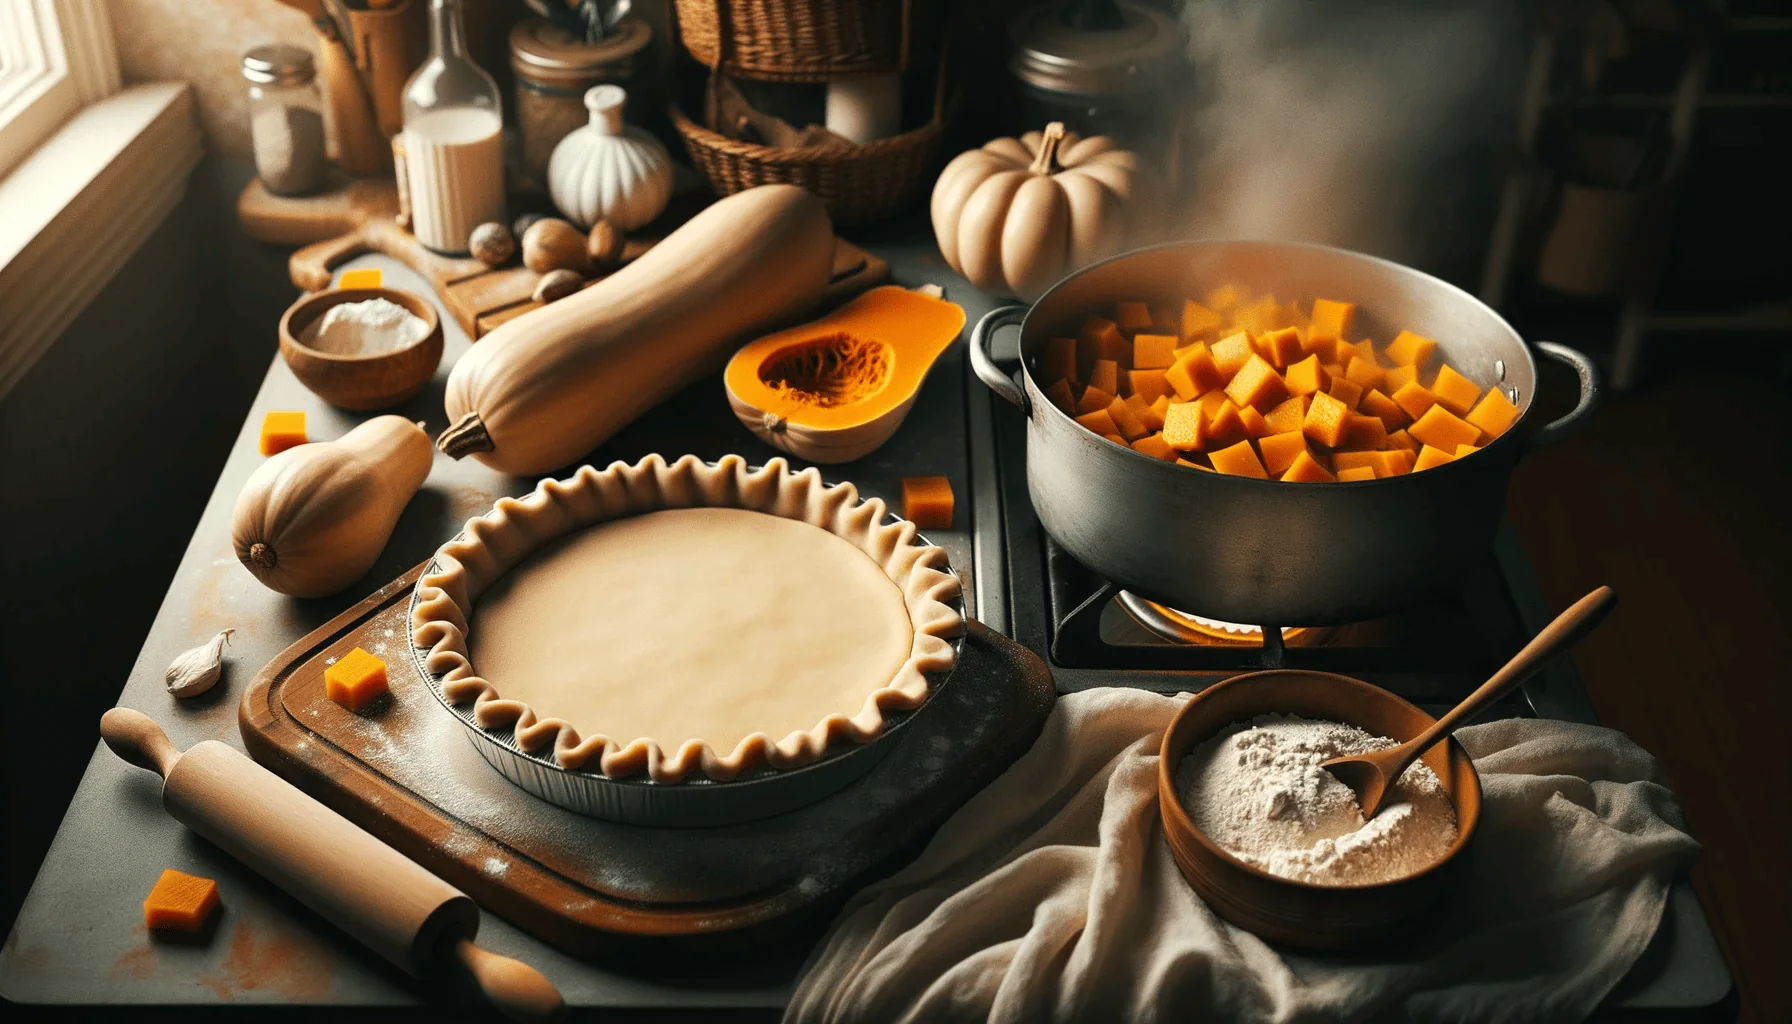 The making of butternut squash pie